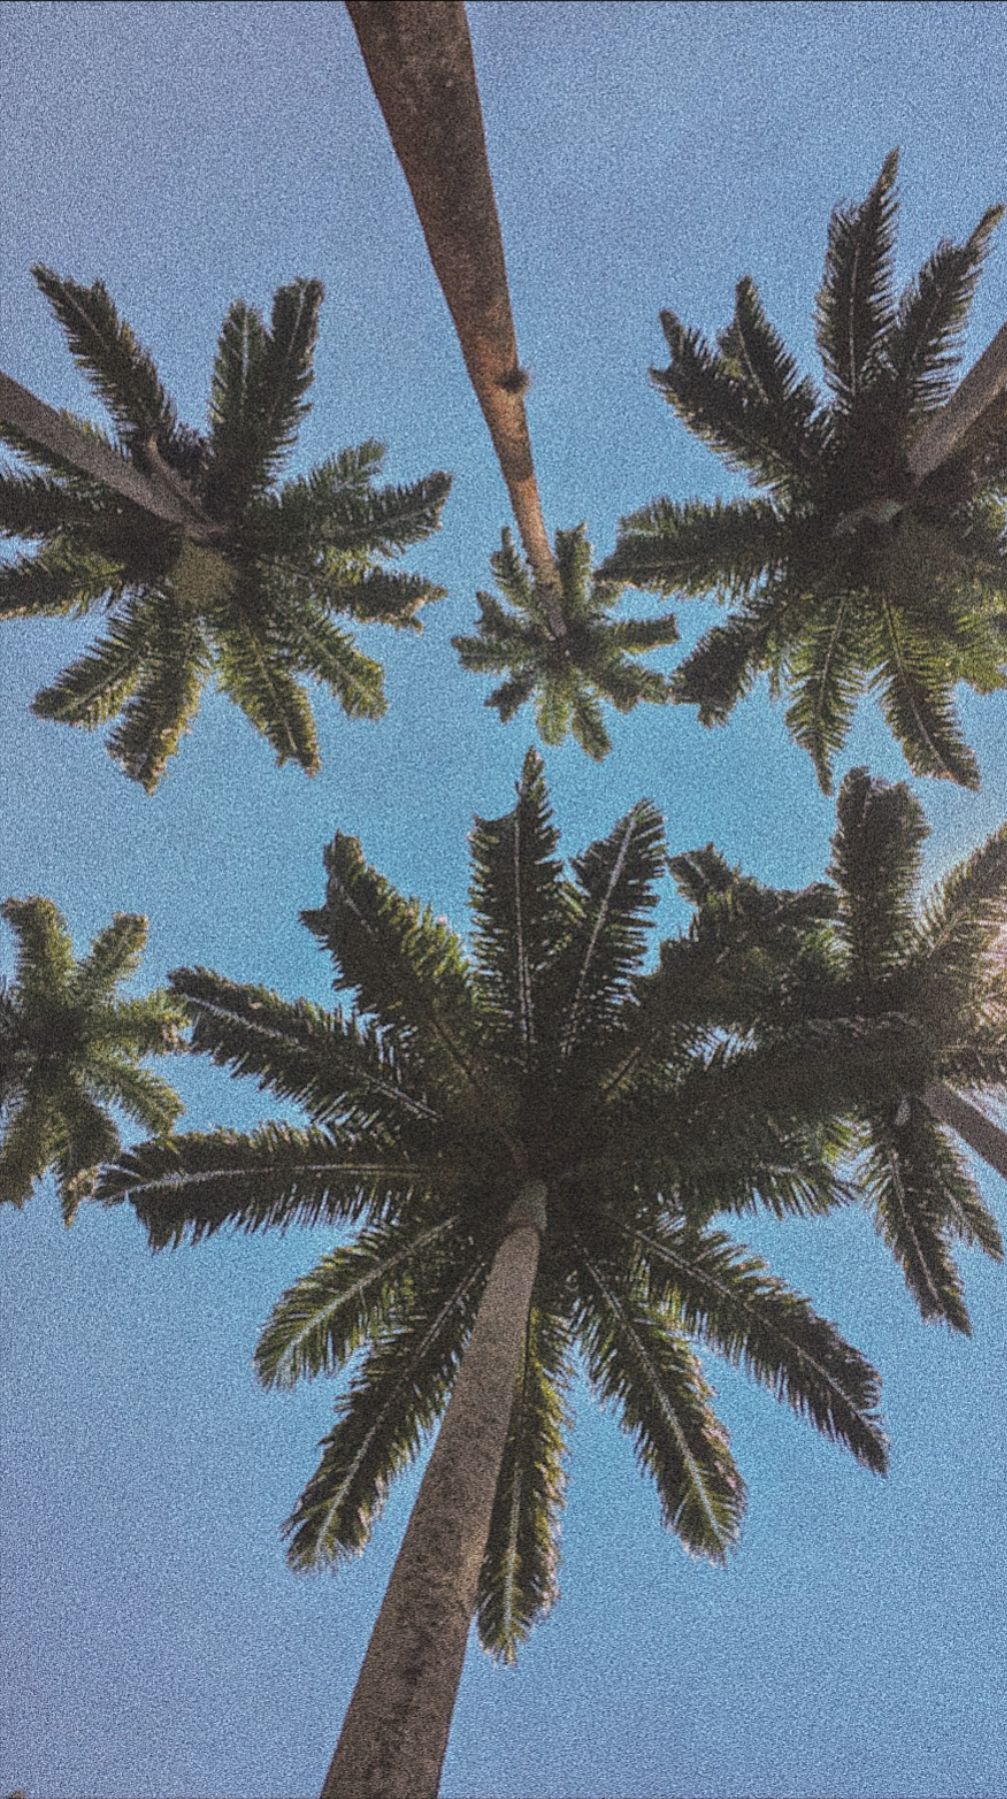 A group of palm trees in the sky - Palm tree